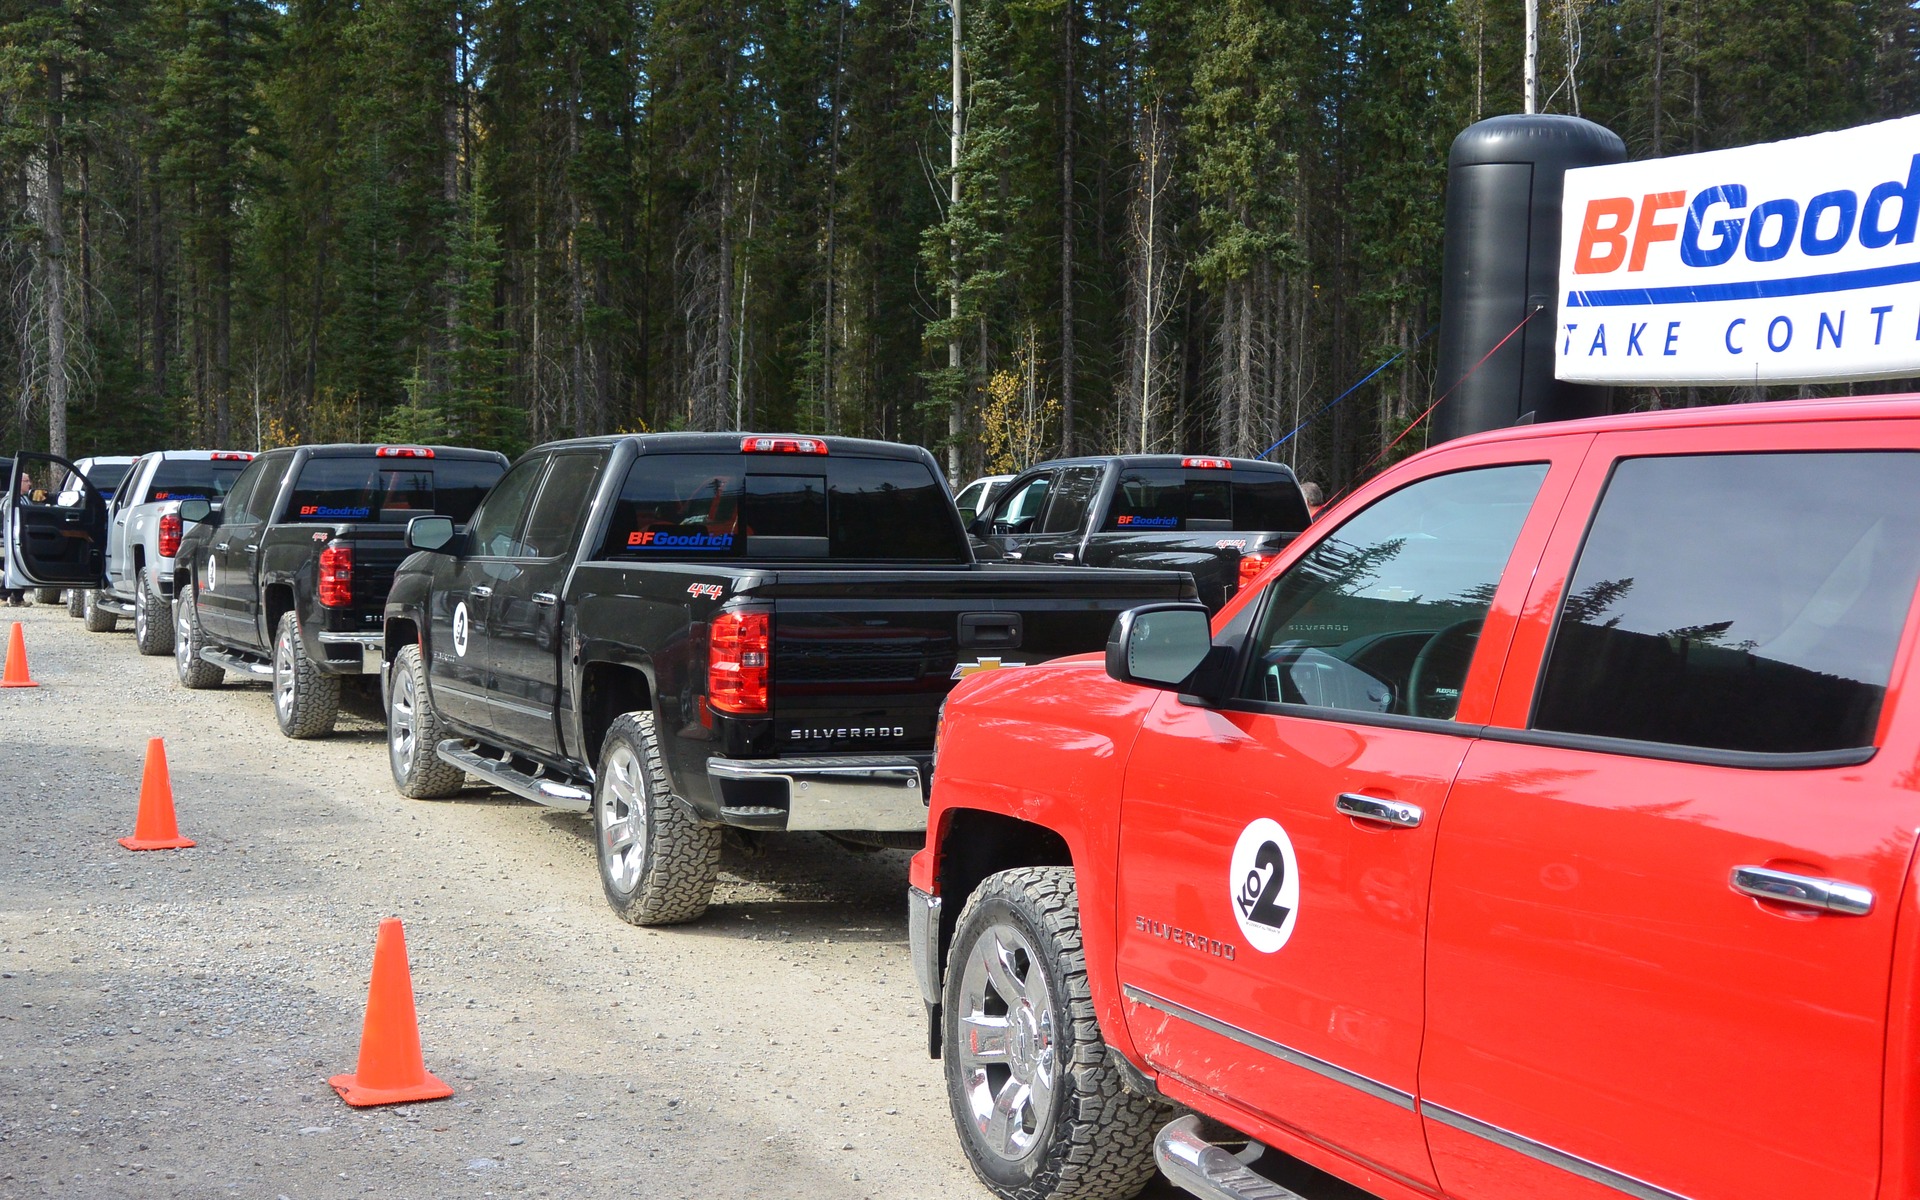 A fleet of about 20 Chevrolet Silverado trucks was used for this testing.